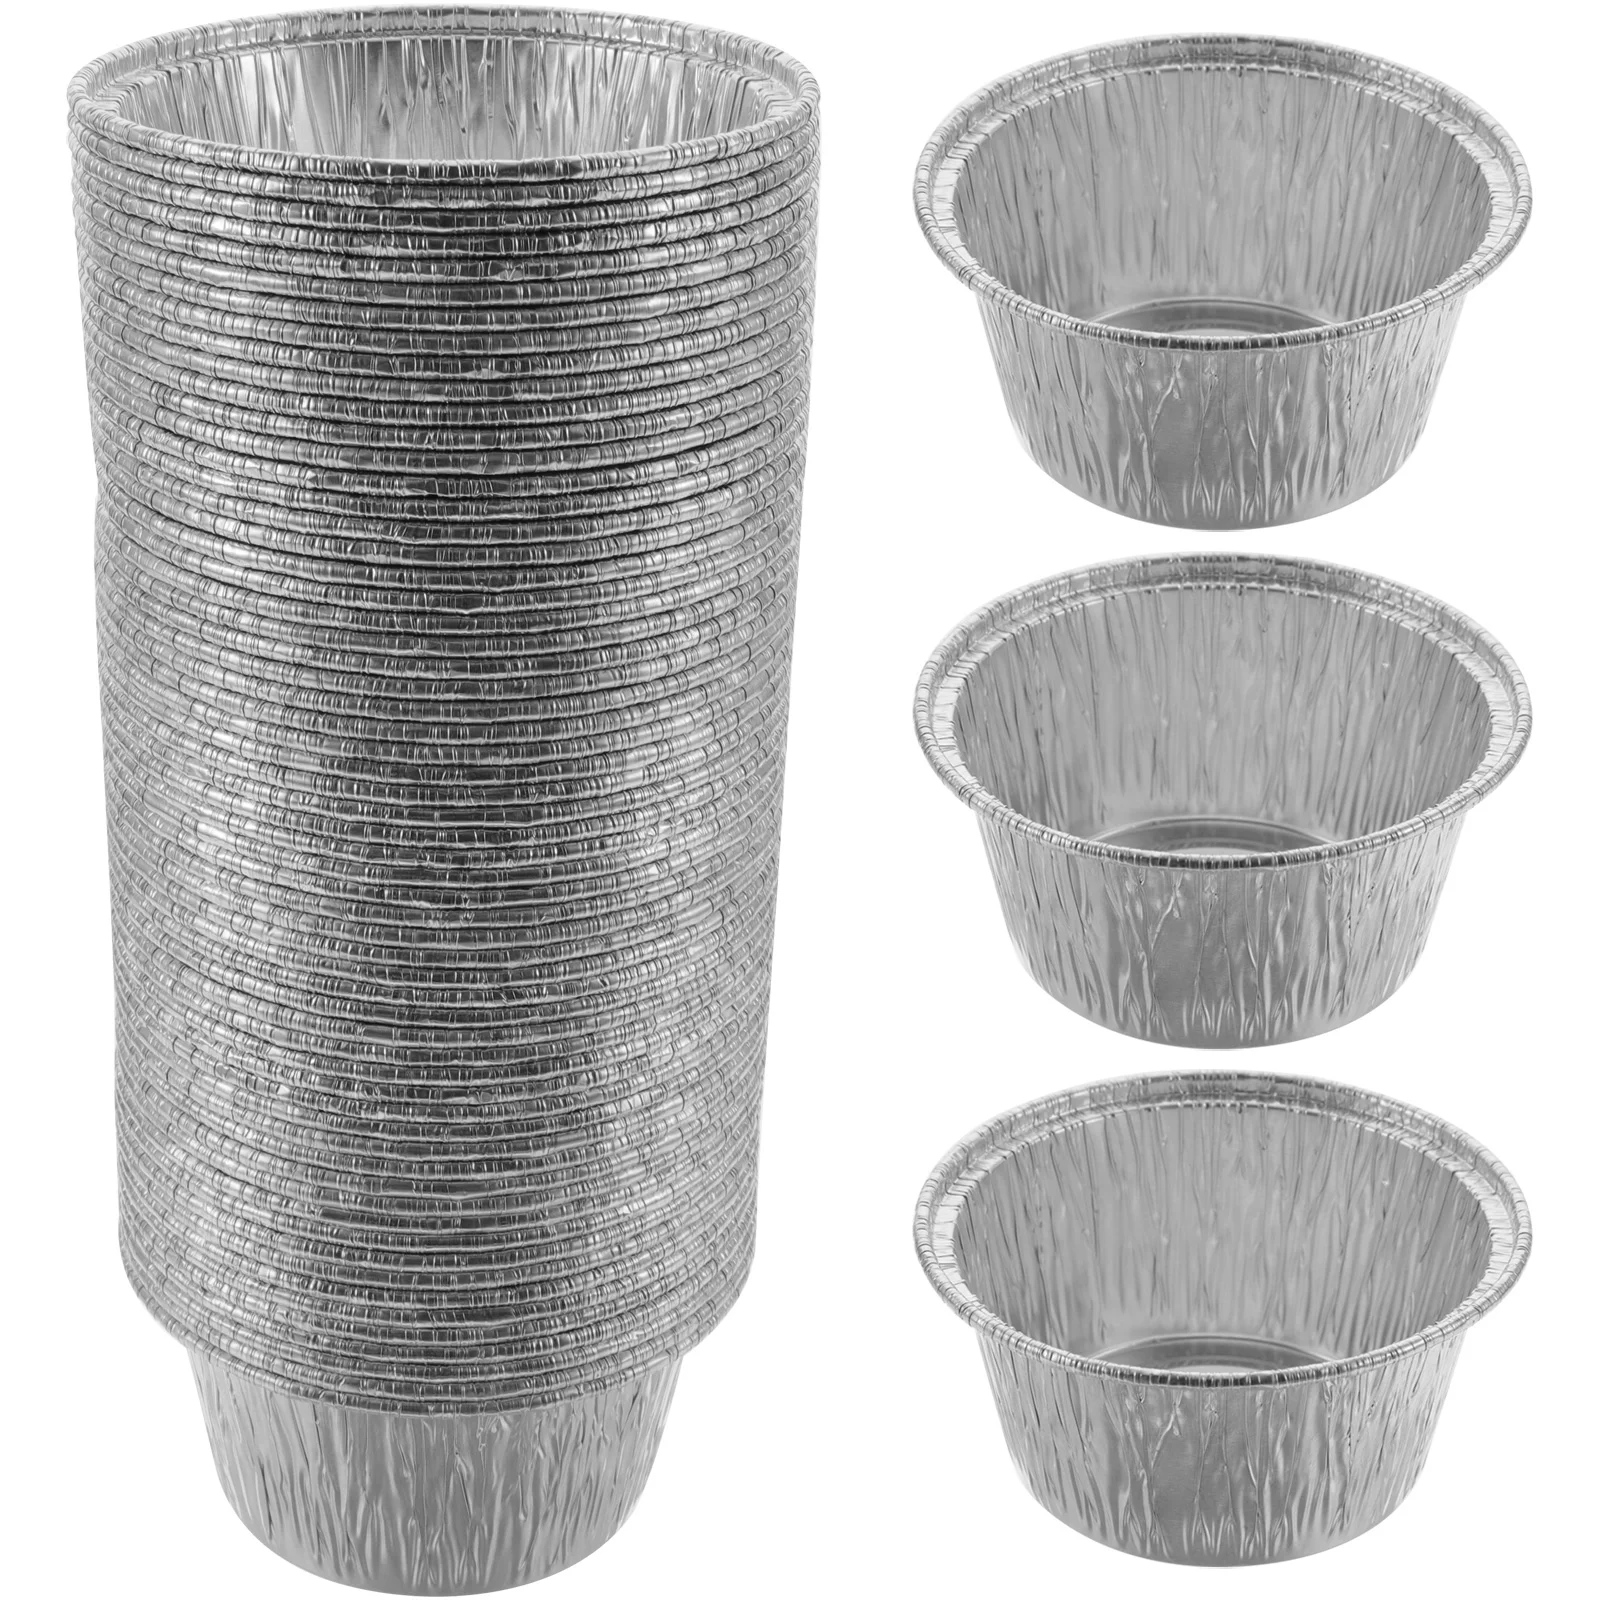 

100Pcs Cupcake Baking Cups Party Gathering Aluminium Foil Baking Cups Pudding Containers